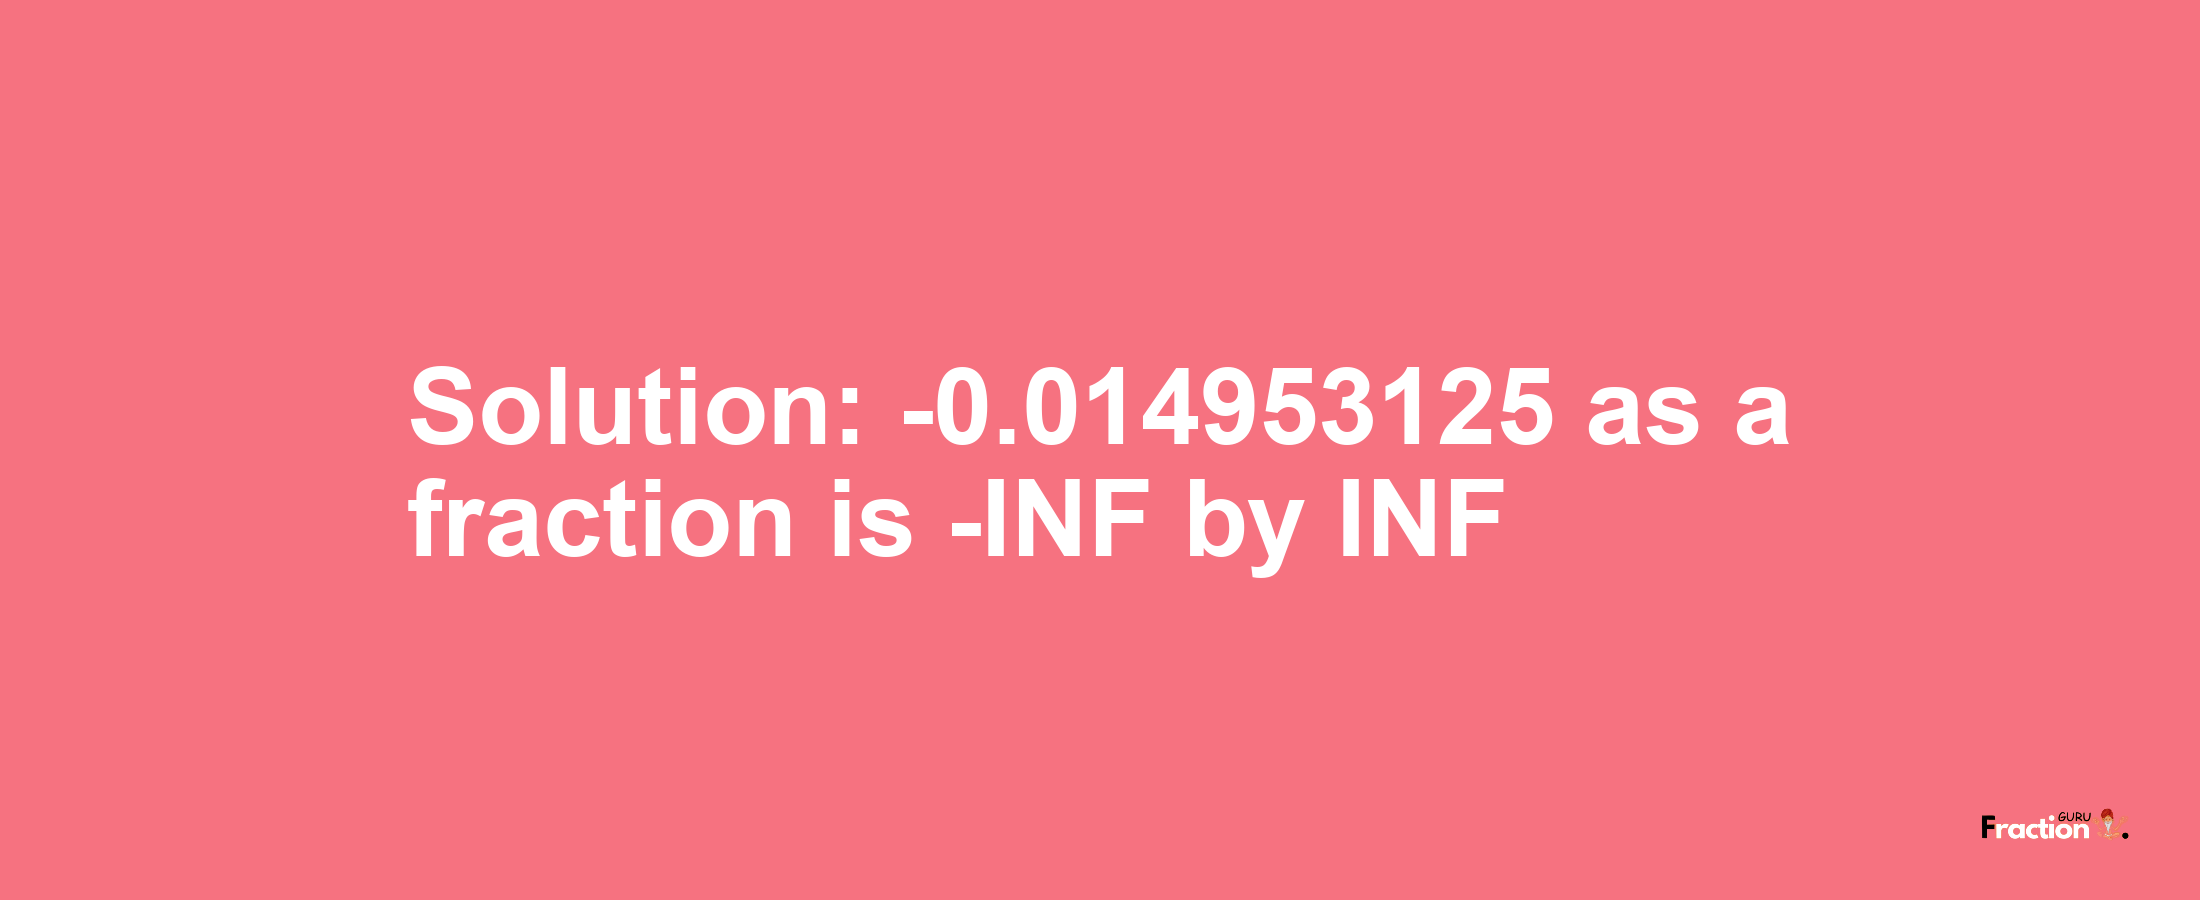 Solution:-0.014953125 as a fraction is -INF/INF